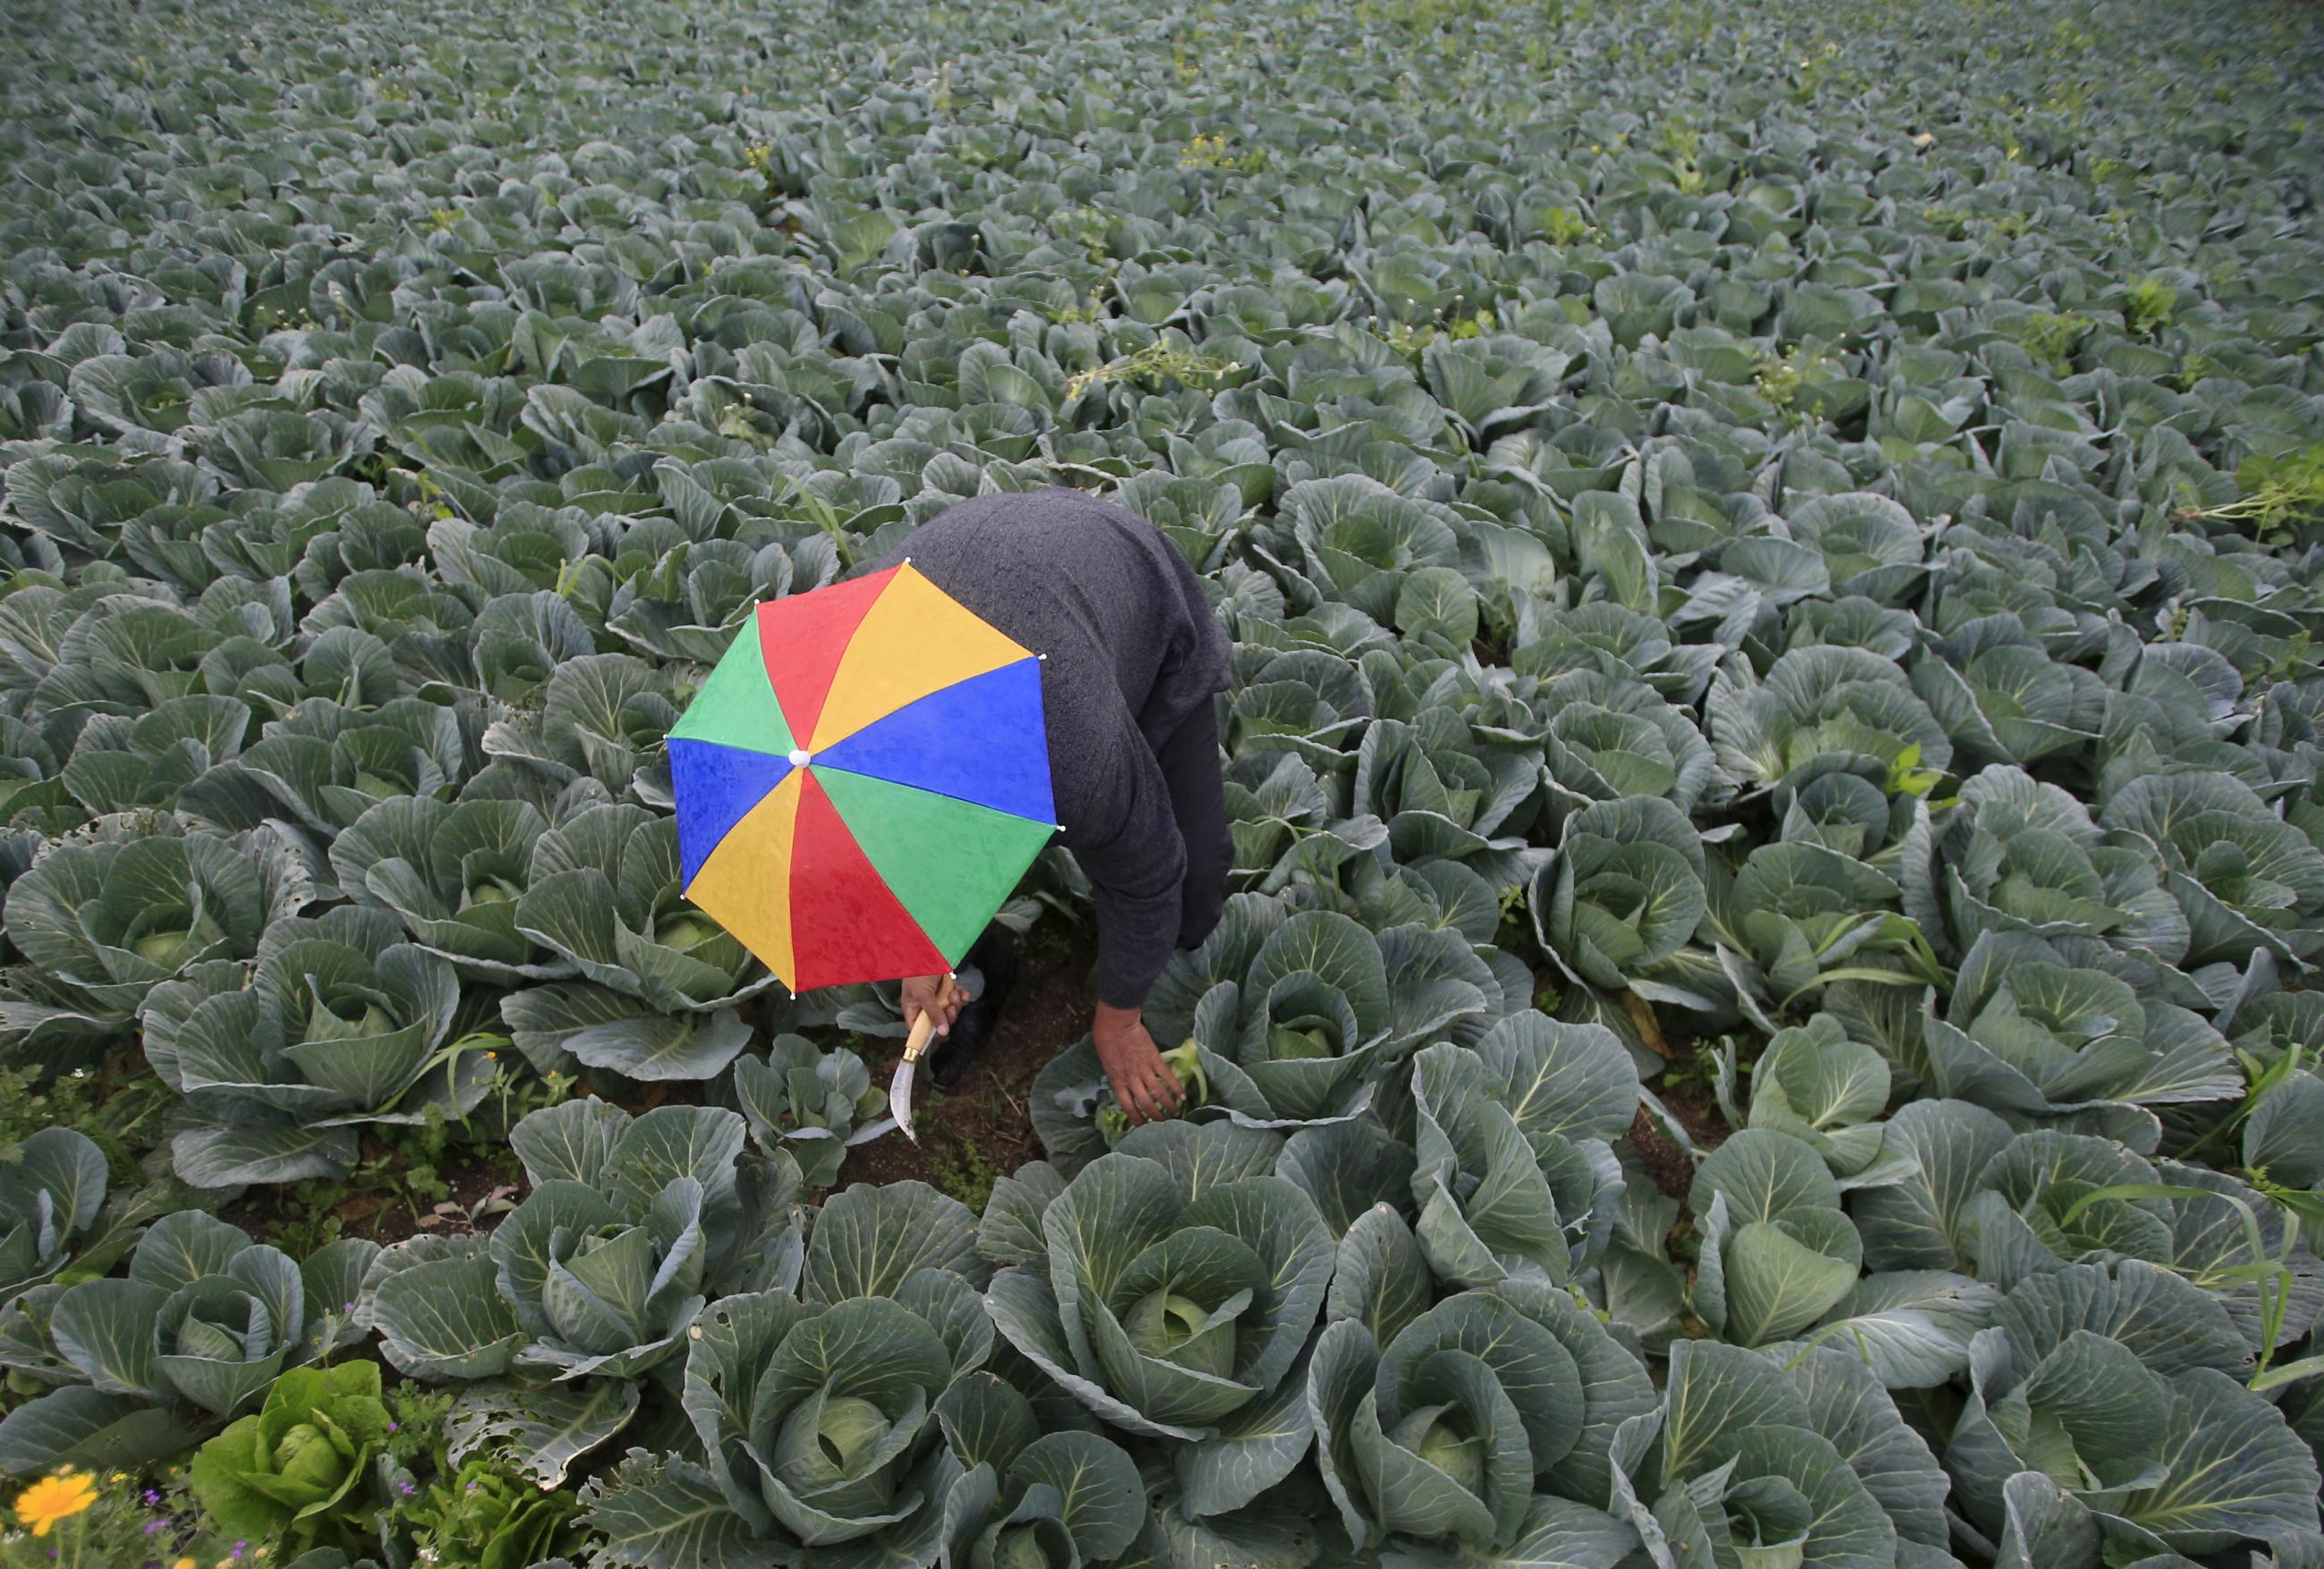 A farmer wearing a rainbow-colored umbrella hat bends down in a field to harvest broccoli, in al-Ansariyeh, a town south of Sidon, Lebanon, on March 15, 2016. 